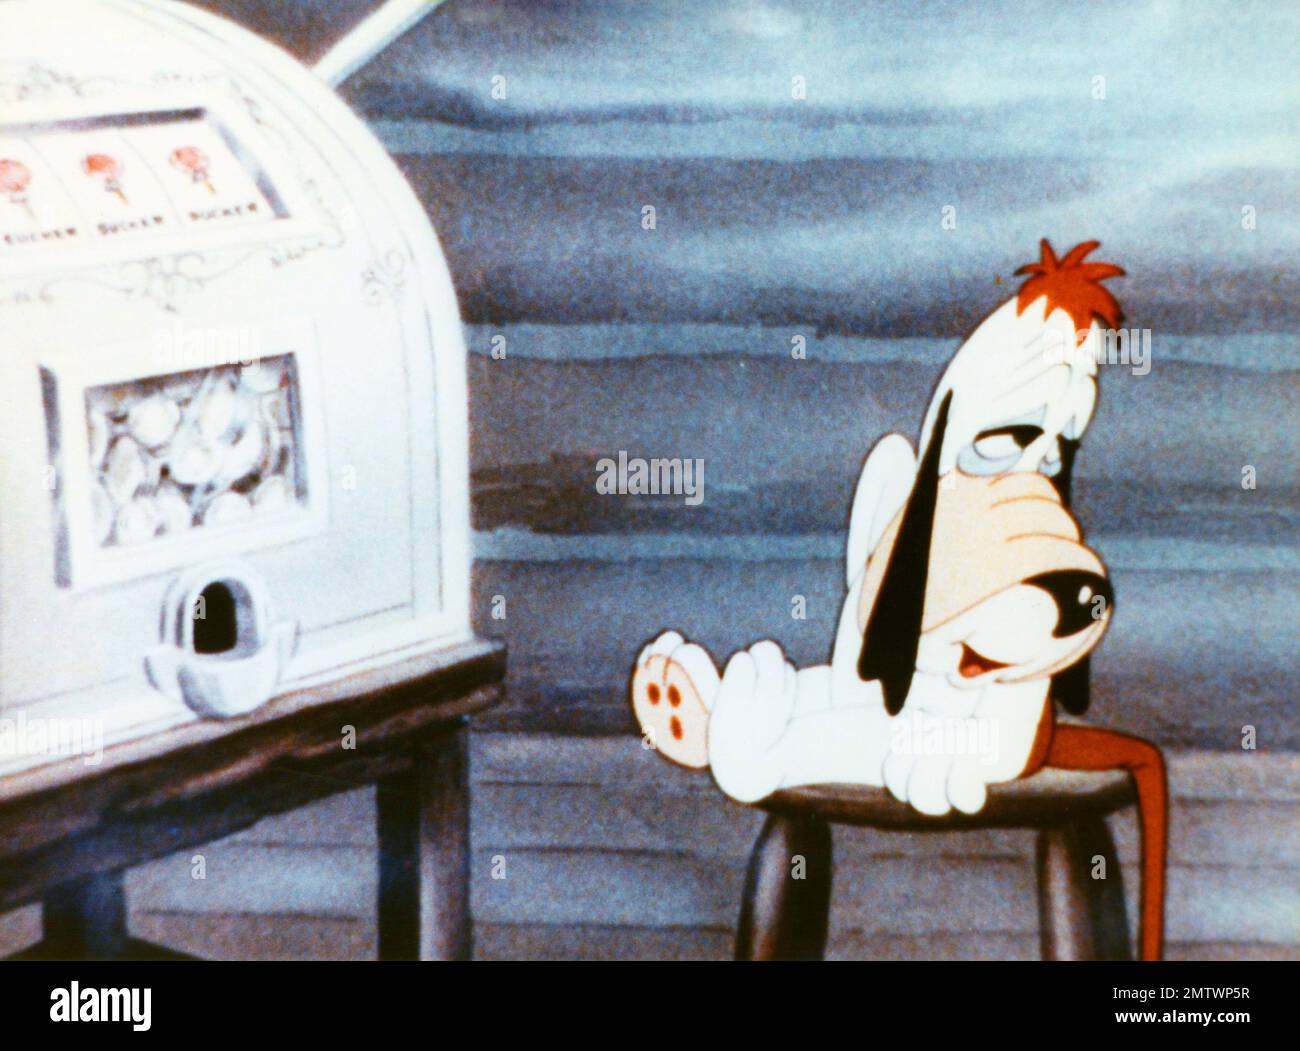 droopy dog sh